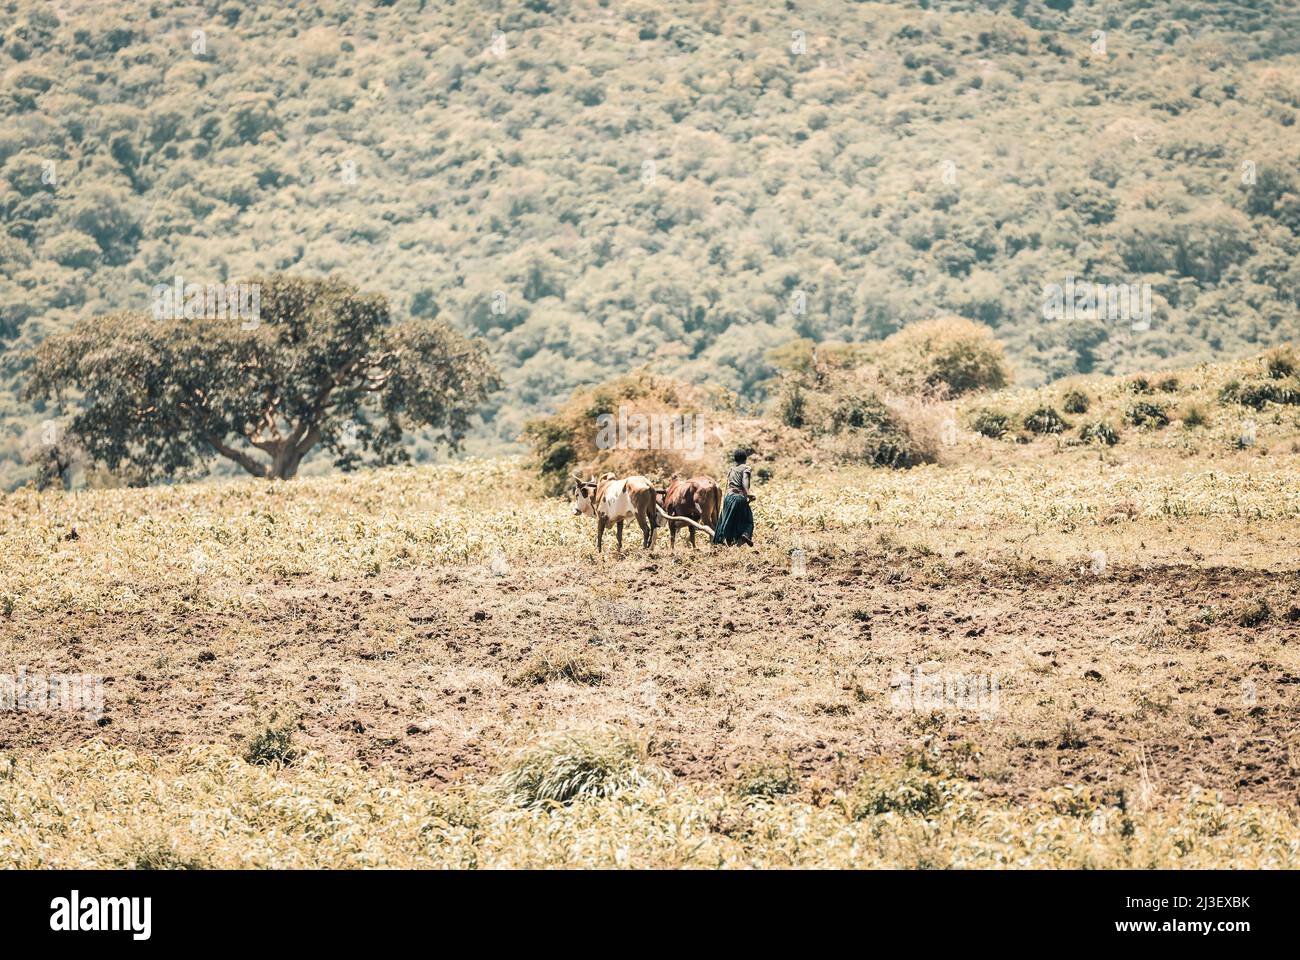 Southern Nations, Ethiopia - May 10, 2019: Unknown poor Ethiopian farmer woman cultivates a field with a traditional primitive wooden plow pulled by c Stock Photo